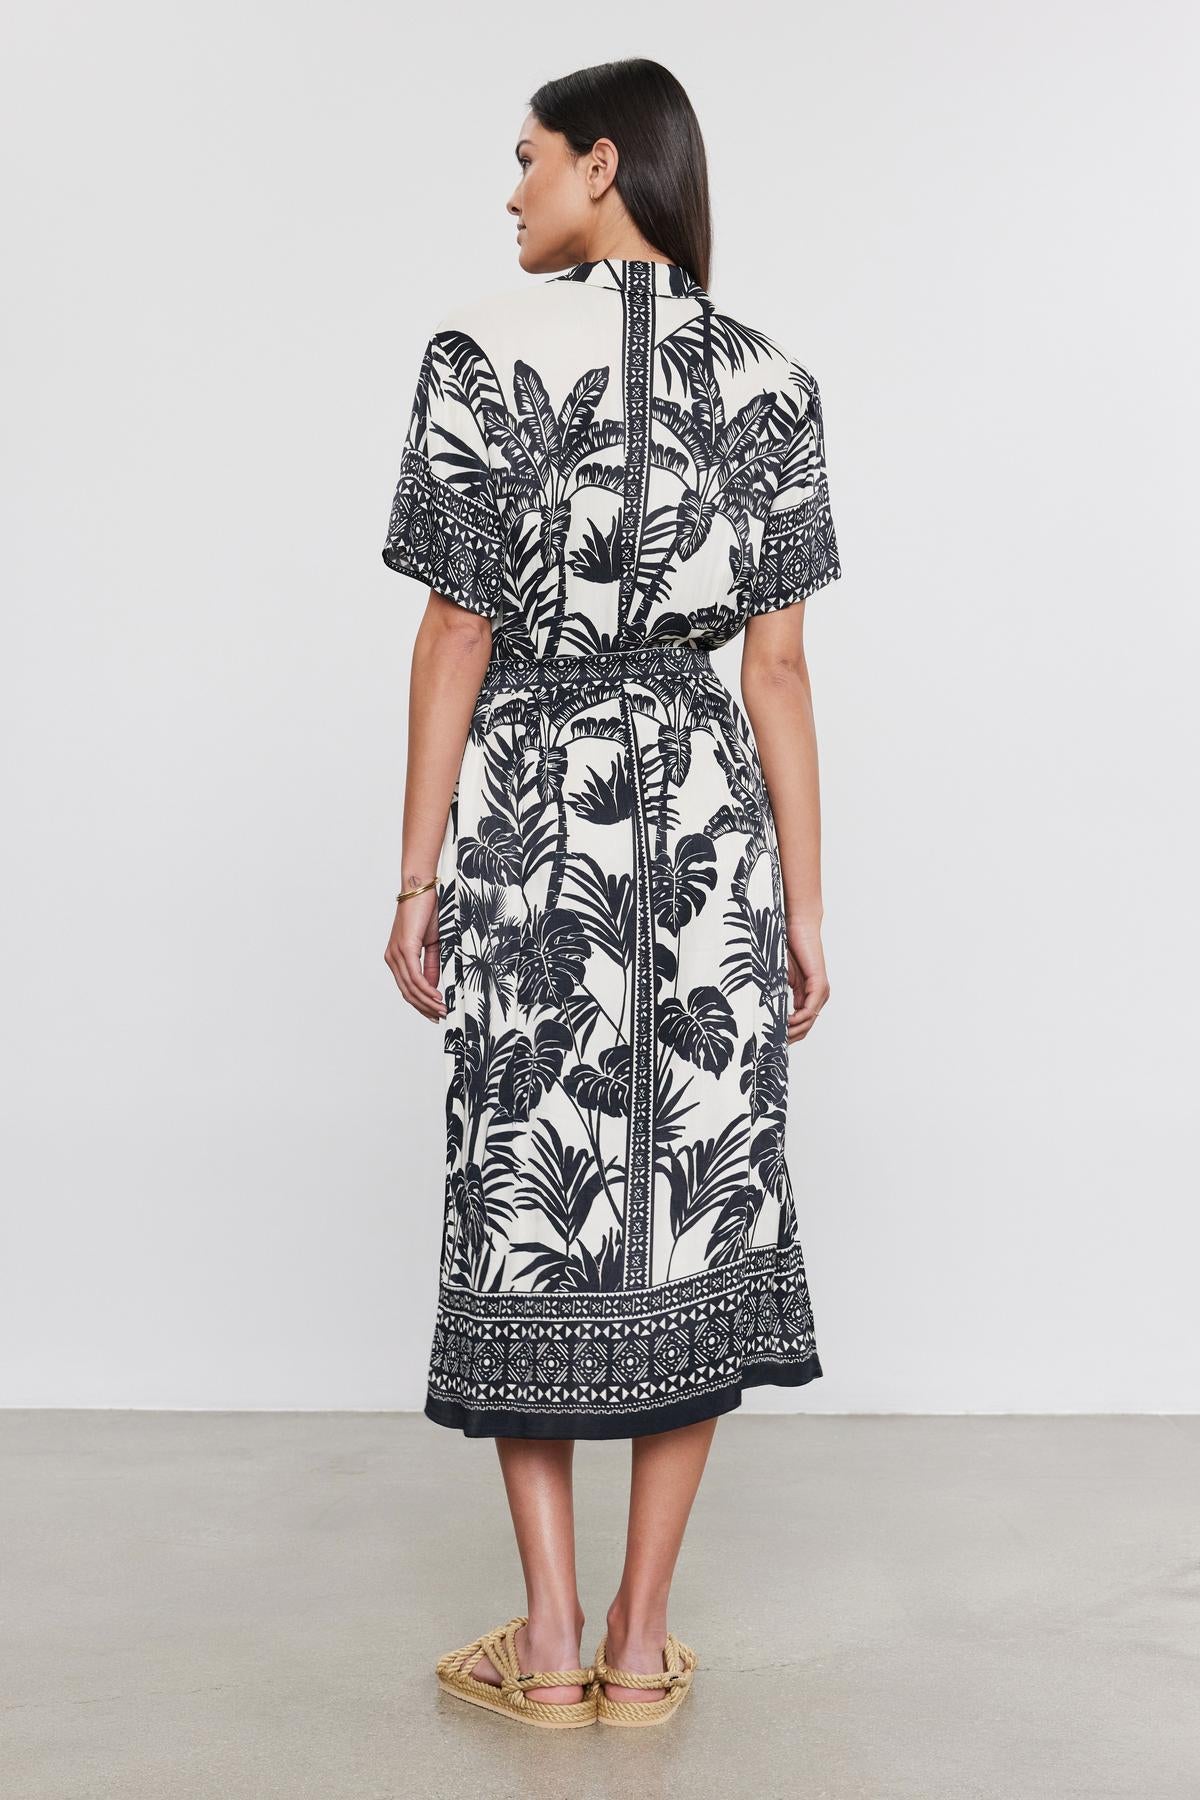 Woman in a black and white palm print FREYA DRESS by Velvet by Graham & Spencer, with a belted waist, standing in profile view against a neutral background.-36910269857985